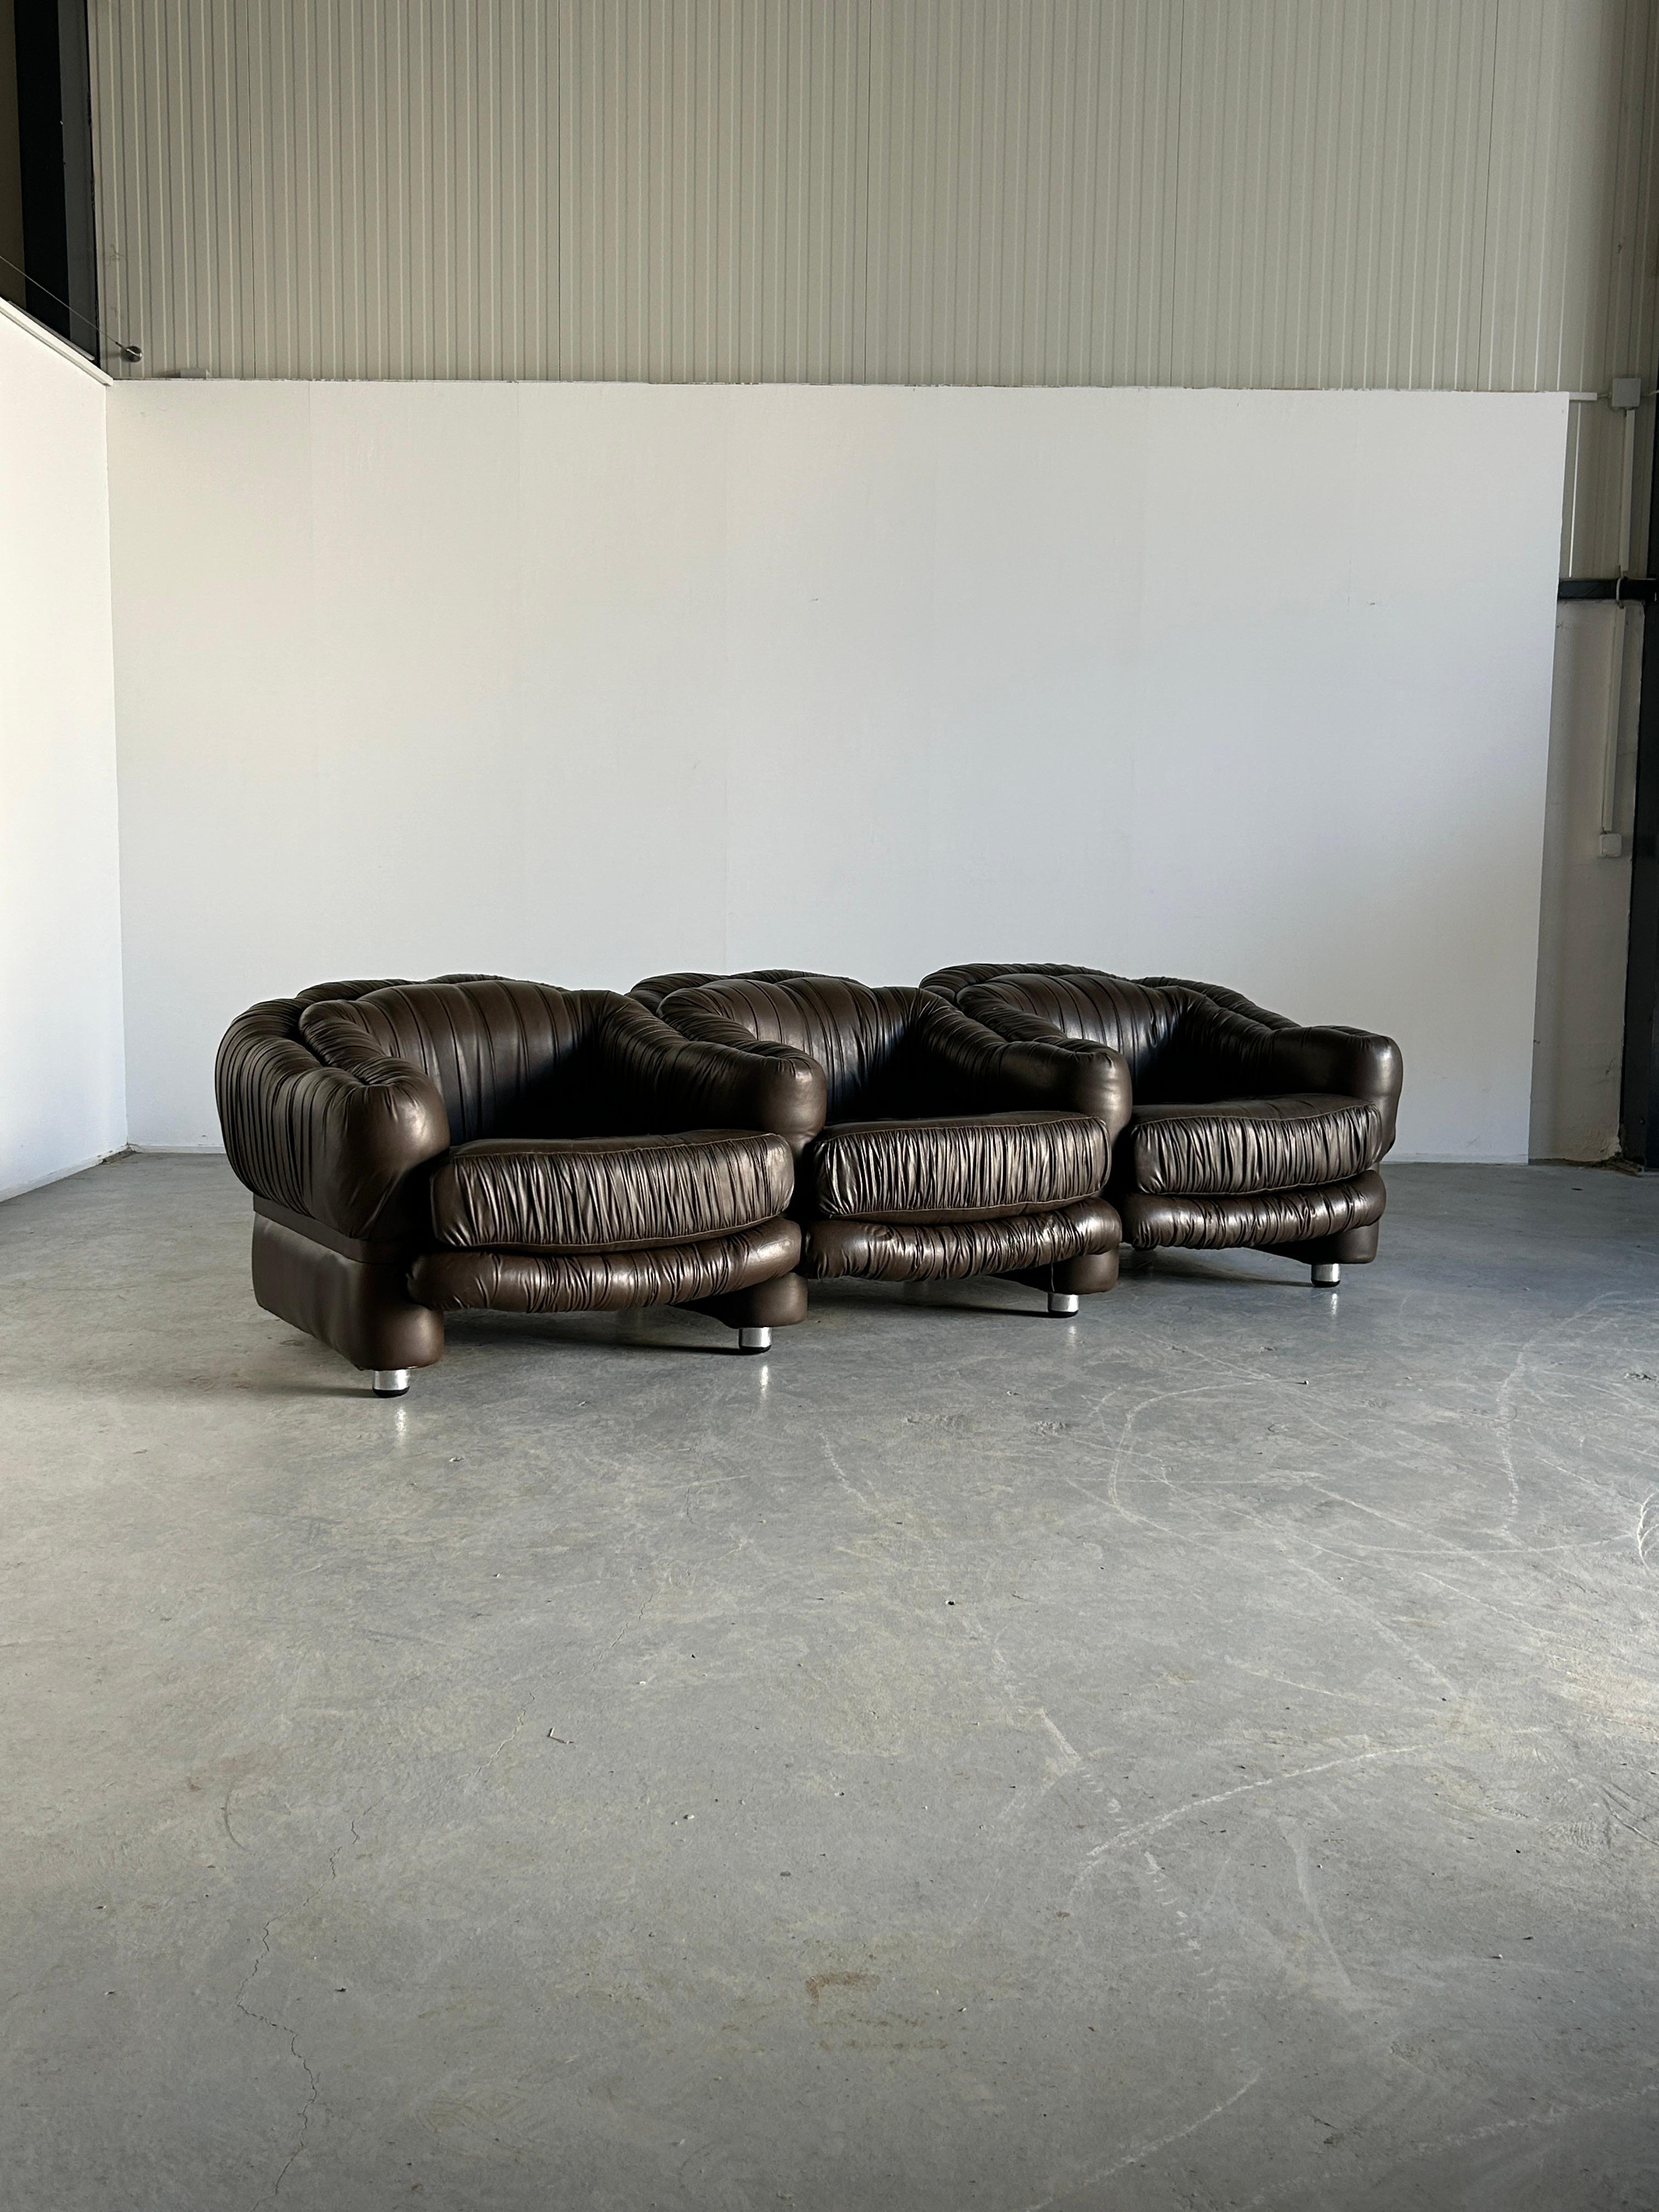 Stunning and rare three-seater lounge sofa by Axel di Pietrobon, 1970s Italy.
Dark brown leather, metal construction and chromed metal legs.
Made from one piece, not modular nor possible to disassemble.

Overall very well preserved with expected